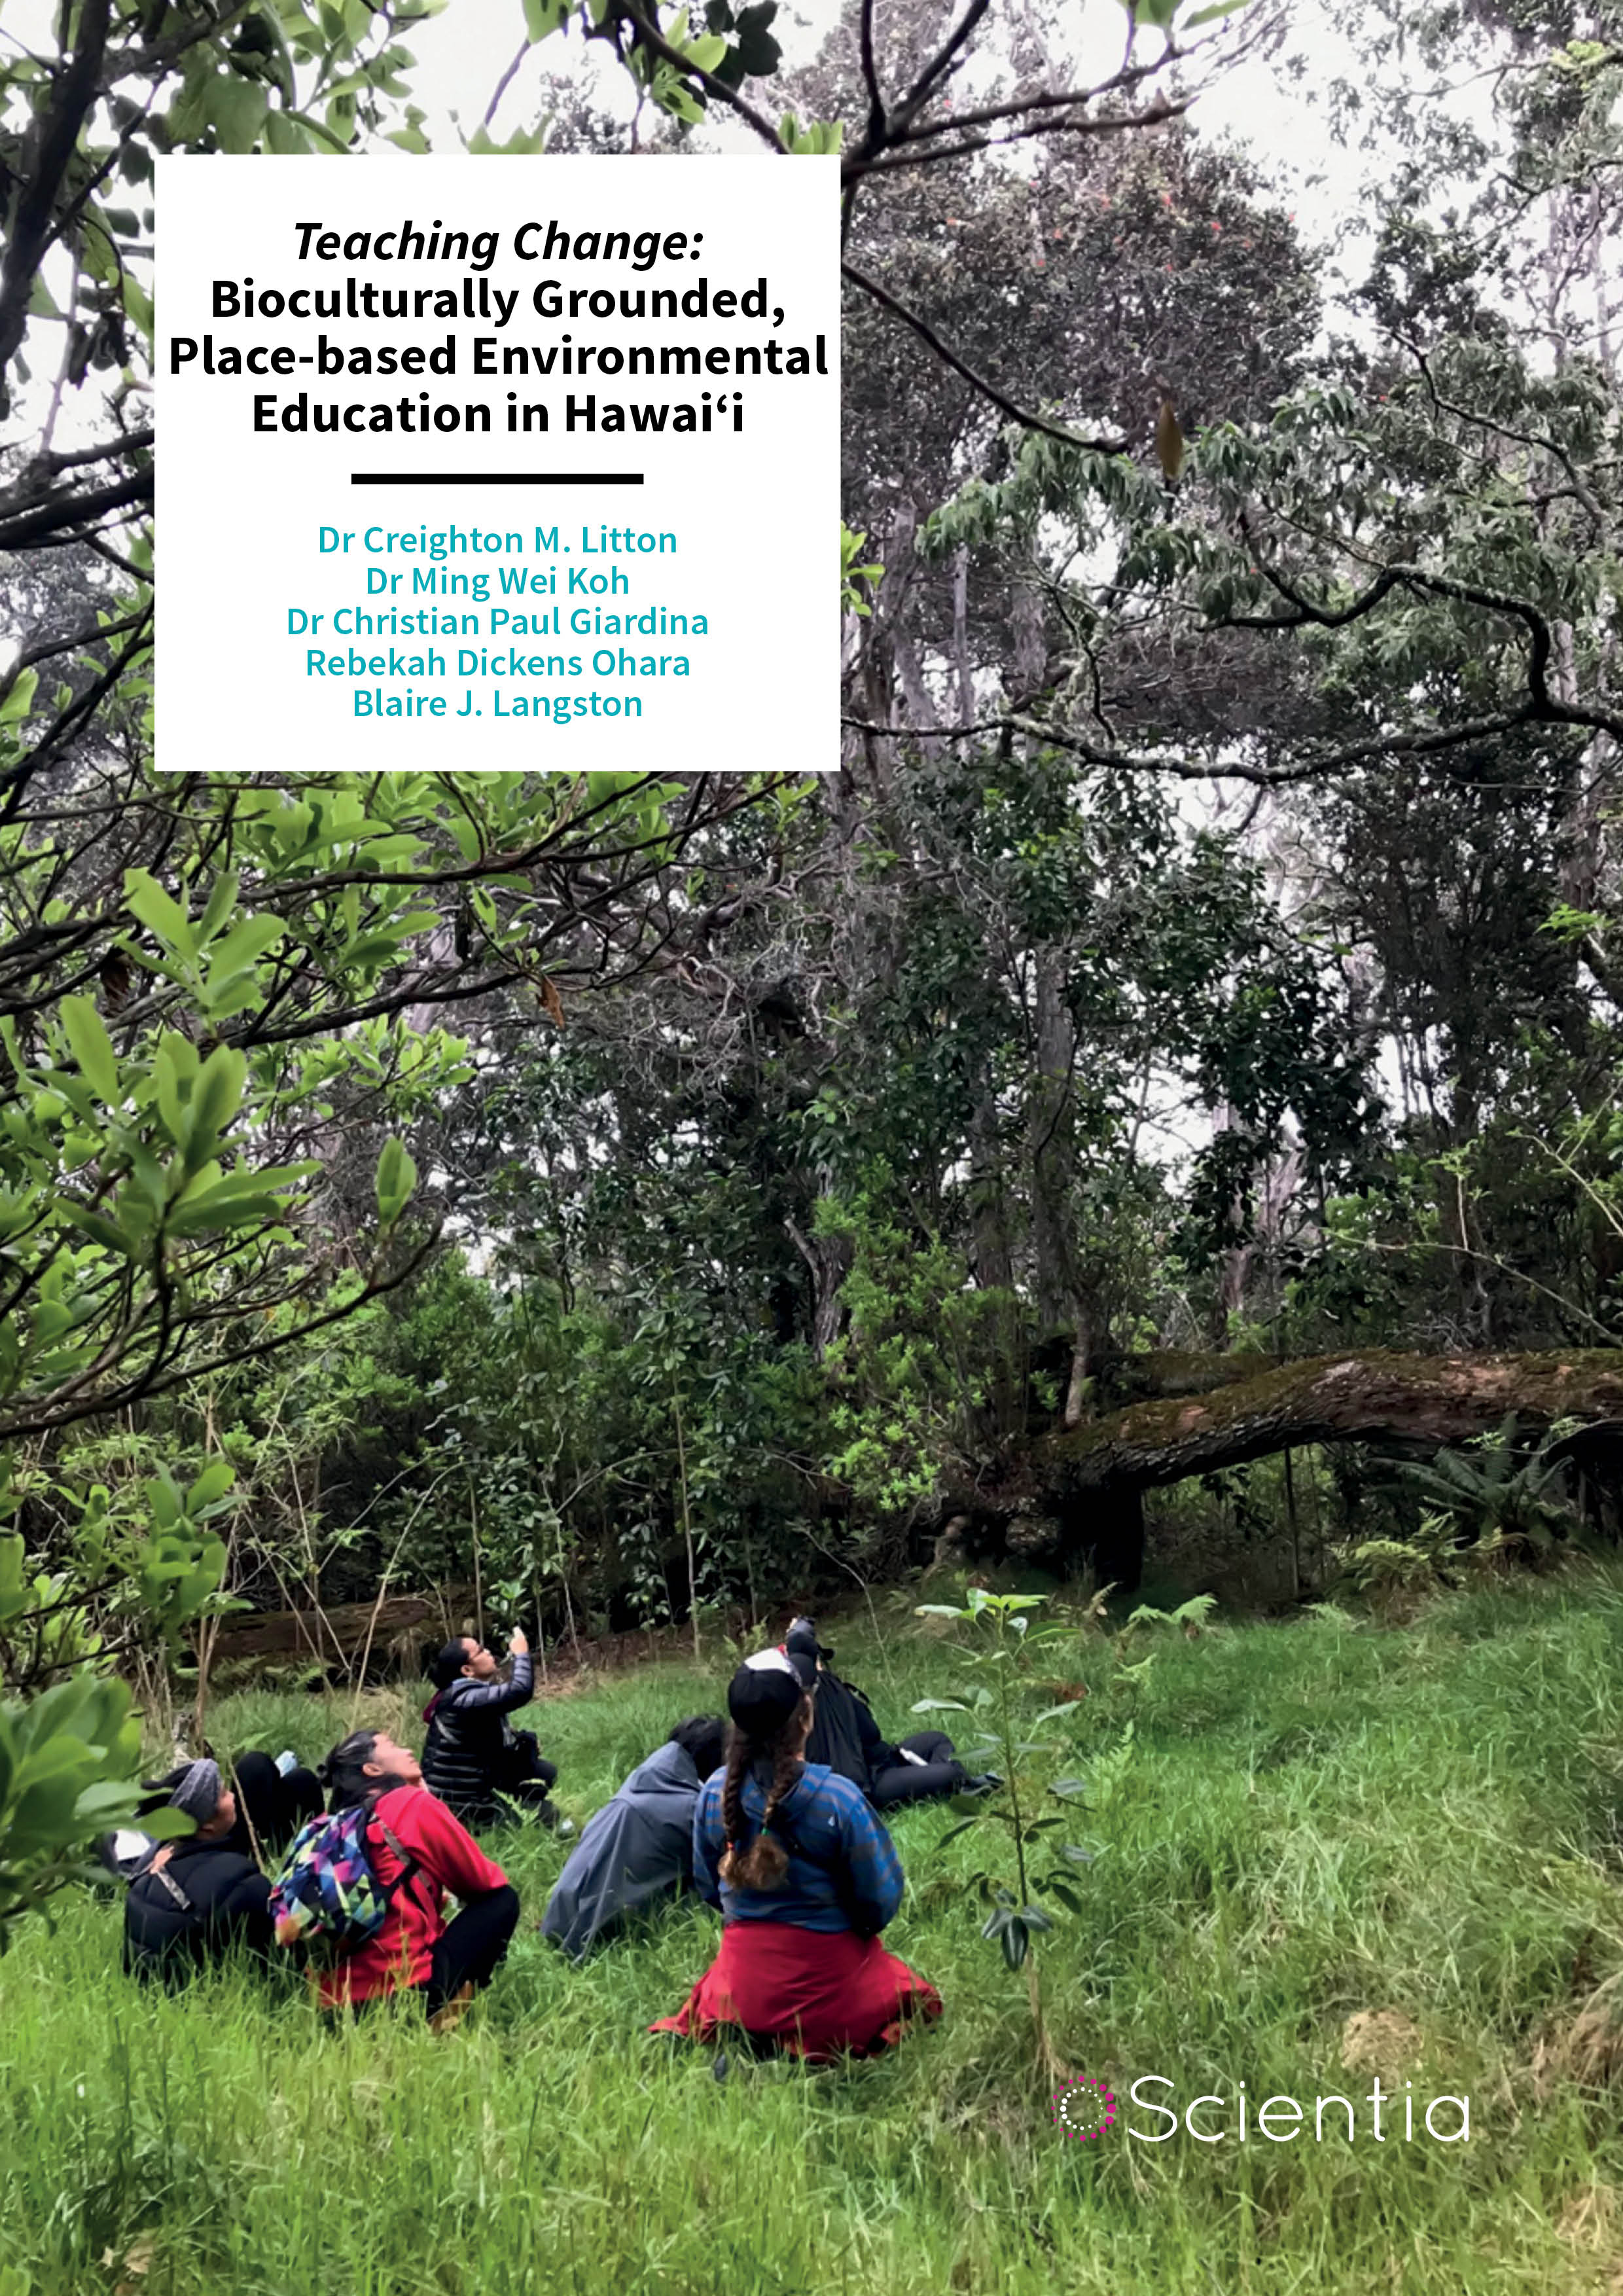 Teaching Change: Bioculturally Grounded, Place-based Environmental Education in Hawaiʻi